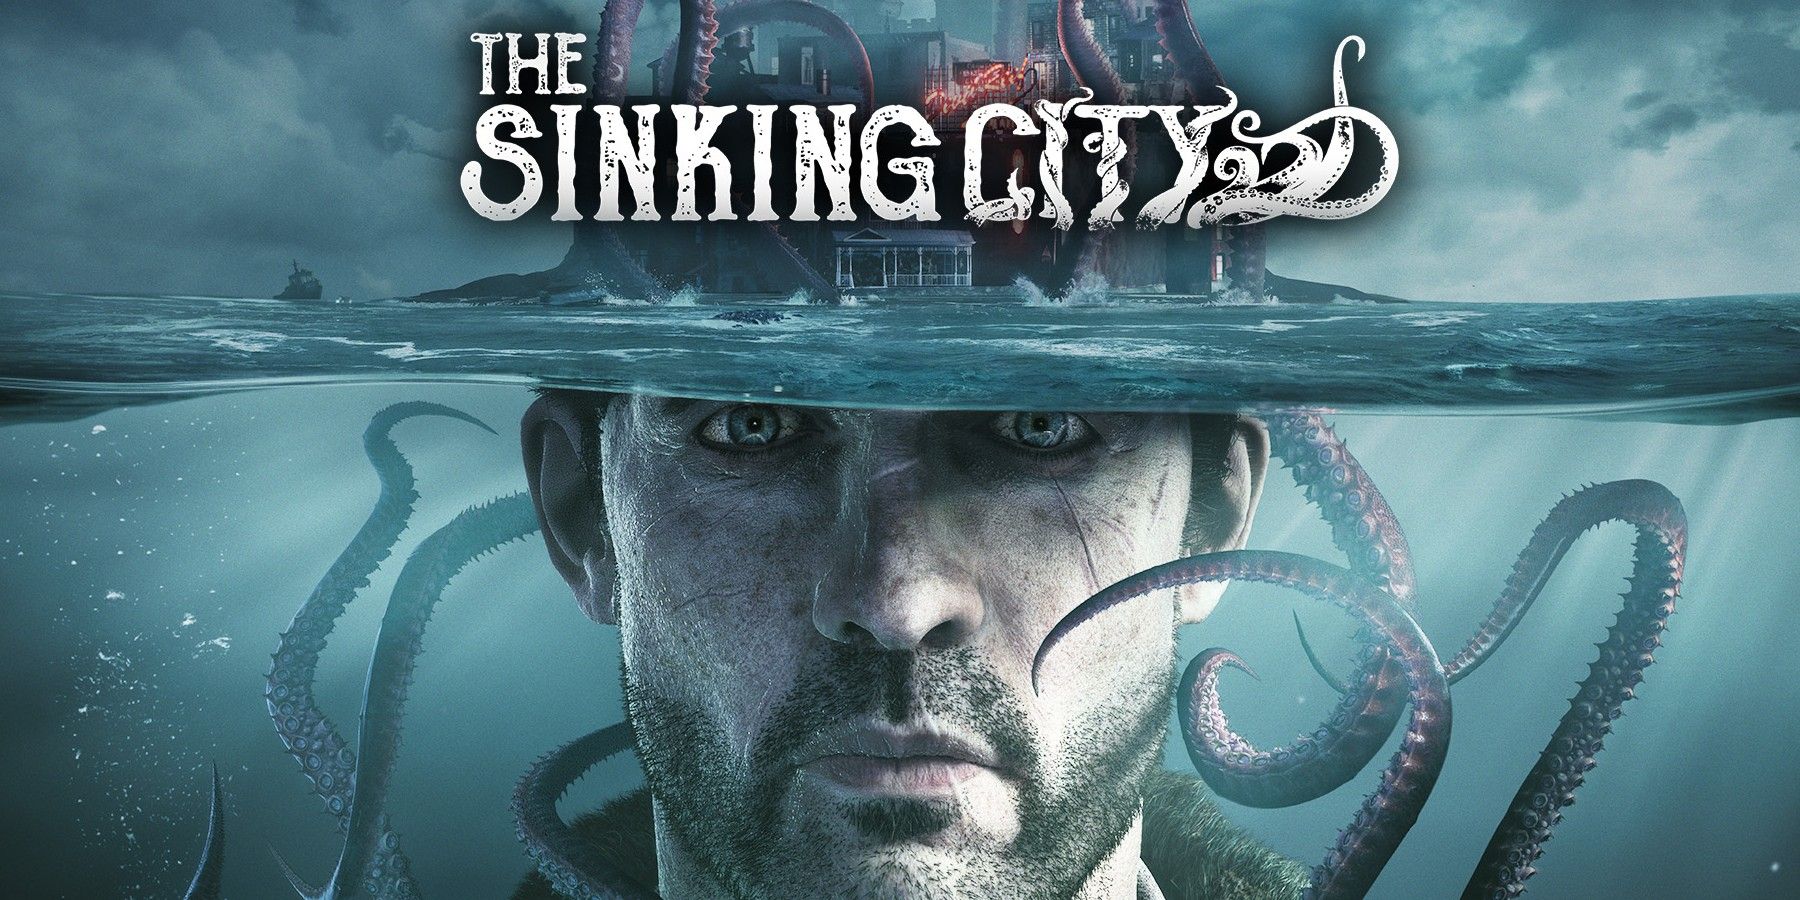 the-sinking-city-cover-image-with-logo